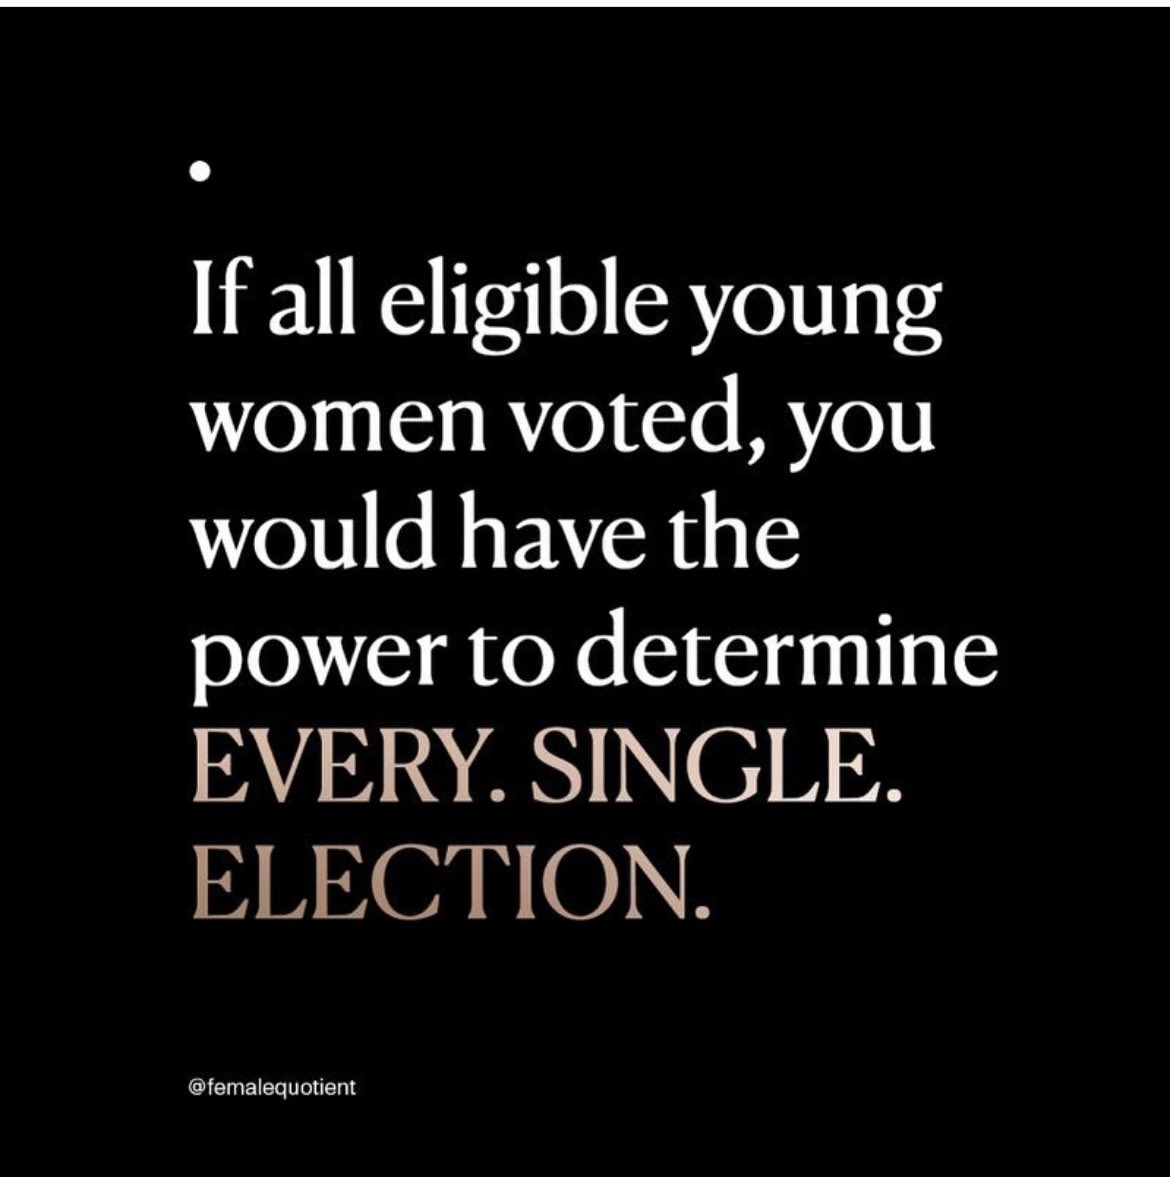 As Gibraltar goes to elections soon, I remind all Gibraltarian women Every.Single.Election #GibraltarElections2023 #Vote #womenempowerment